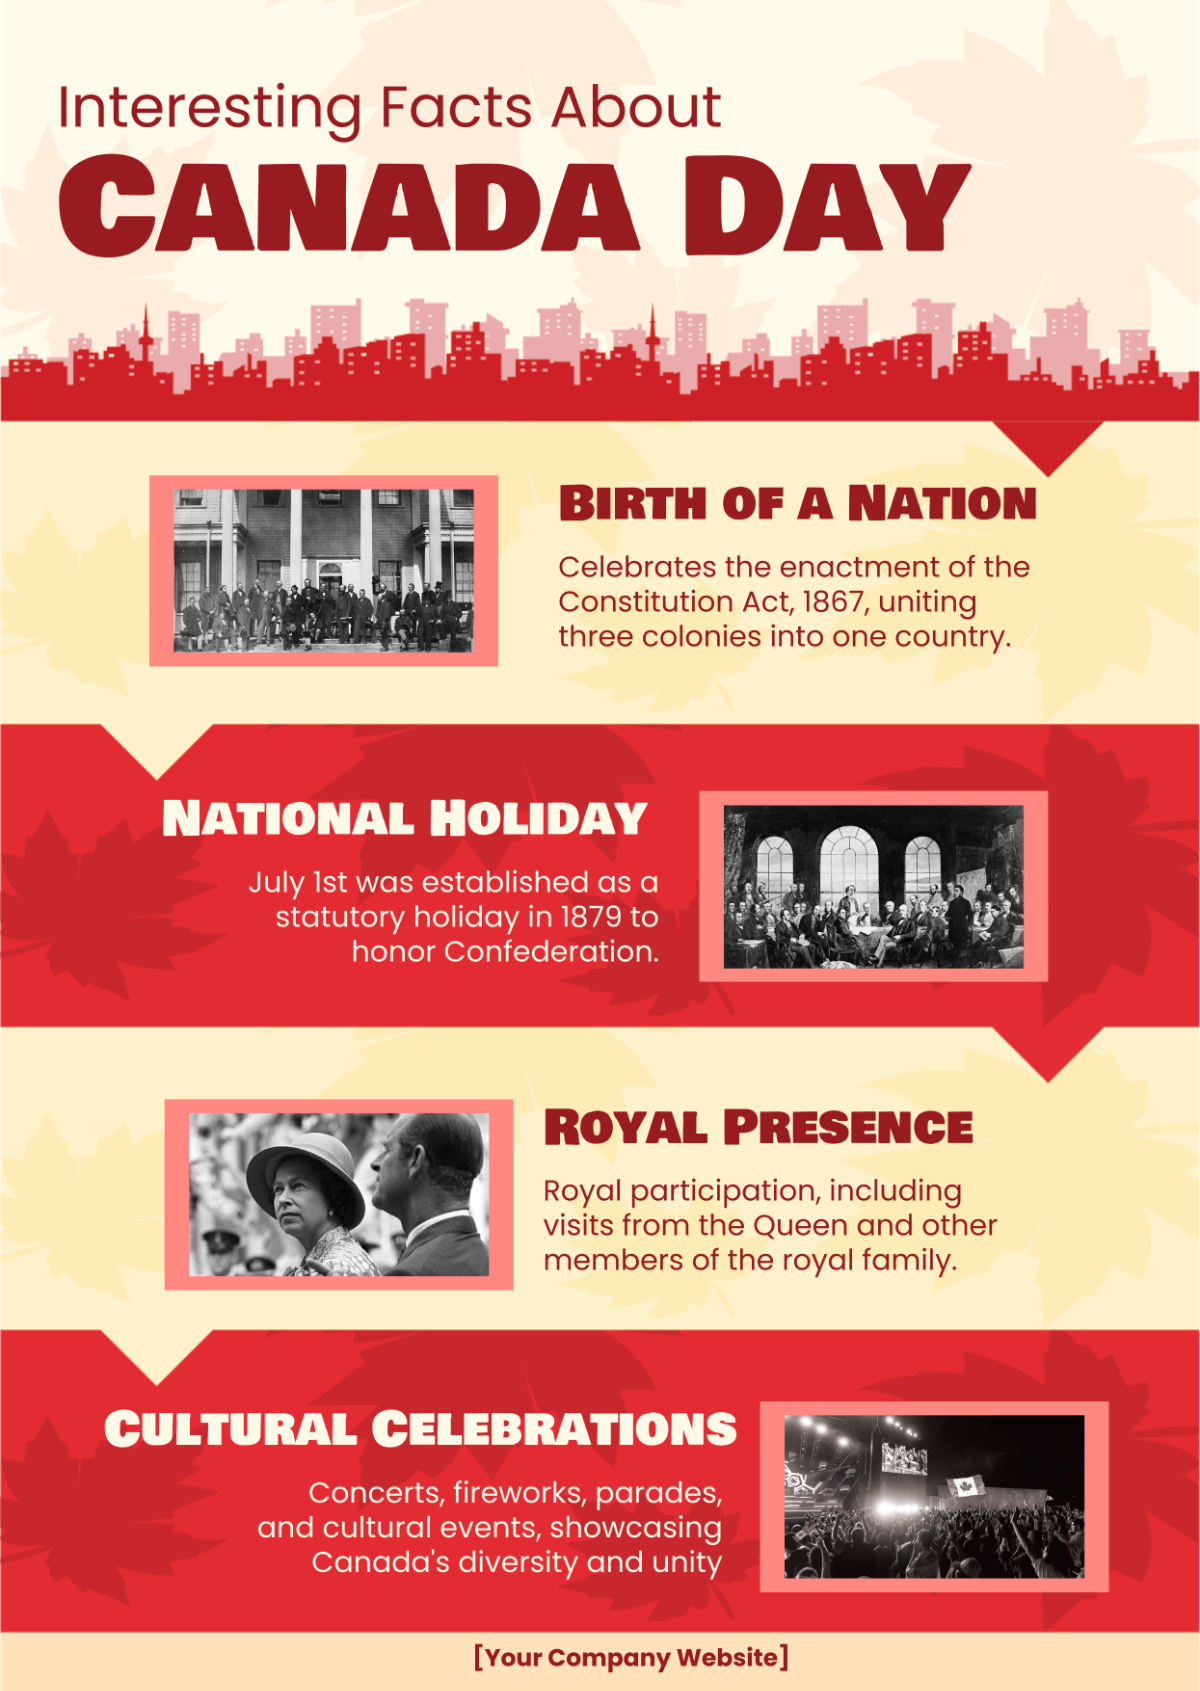 What is interesting about Canada Day?